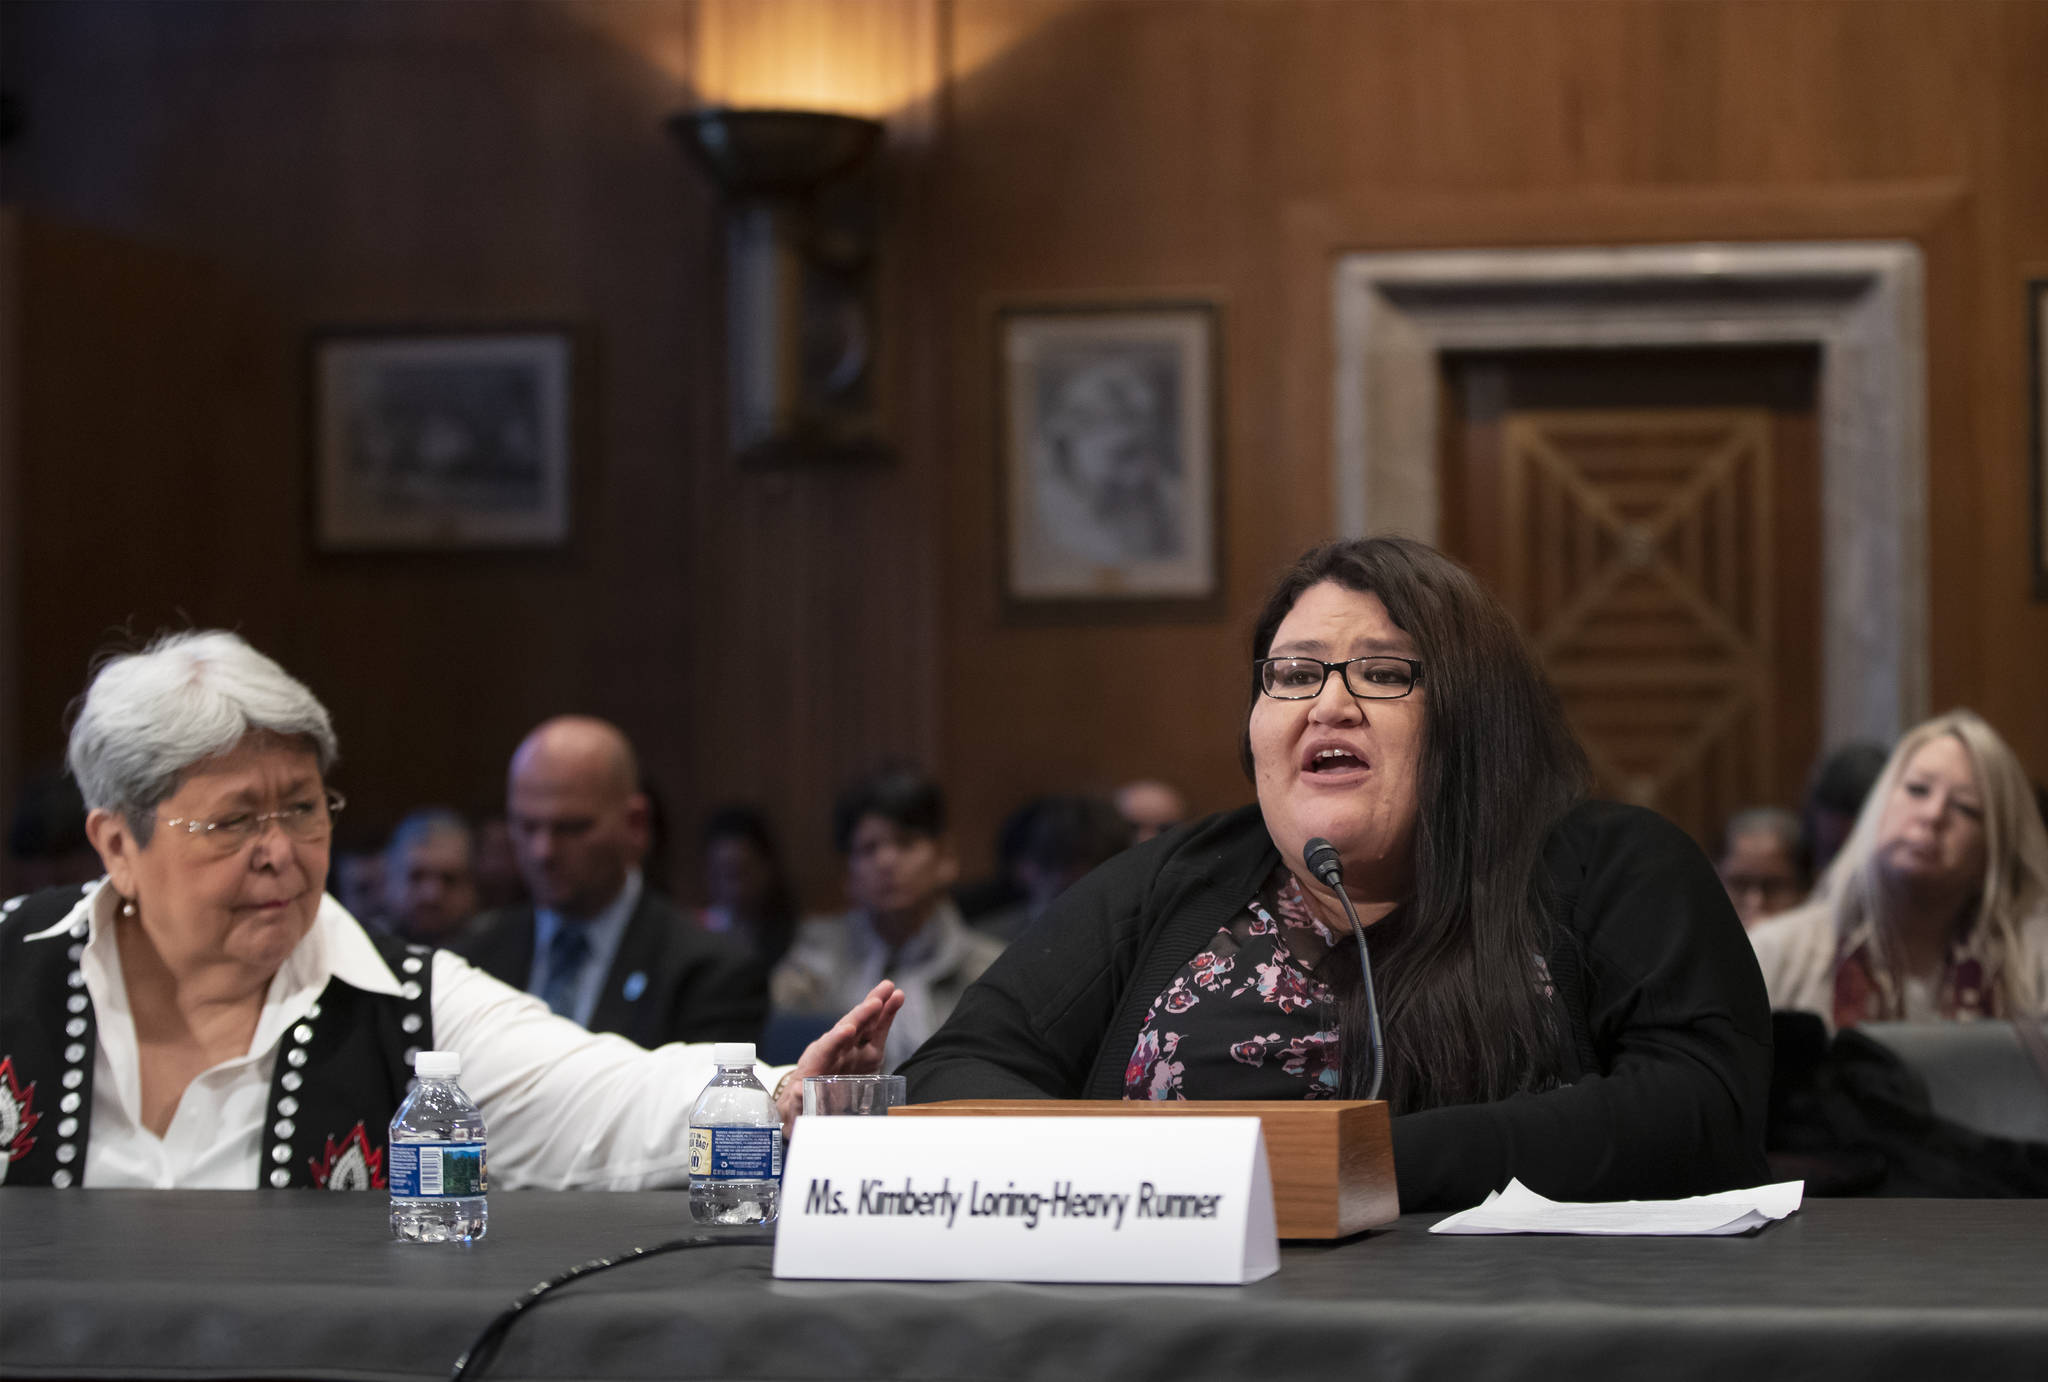 Kimberly Loring, right, whose sister, Ashley Loring HeavyRunner disappeared from the Blackfeet Reservation in Montana in 2017, is comforted by Patricia Alexander of the Tlingit and Haida Indian Tribes of Alaska, left, as the Senate Committee on Indian Affairs holds a hearing to examine concerns about investigations into the deaths and disappearance of Native American women, on Capitol Hill in Washington, Wednesday, Dec. 12, 2018. (AP Photo | J. Scott Applewhite)